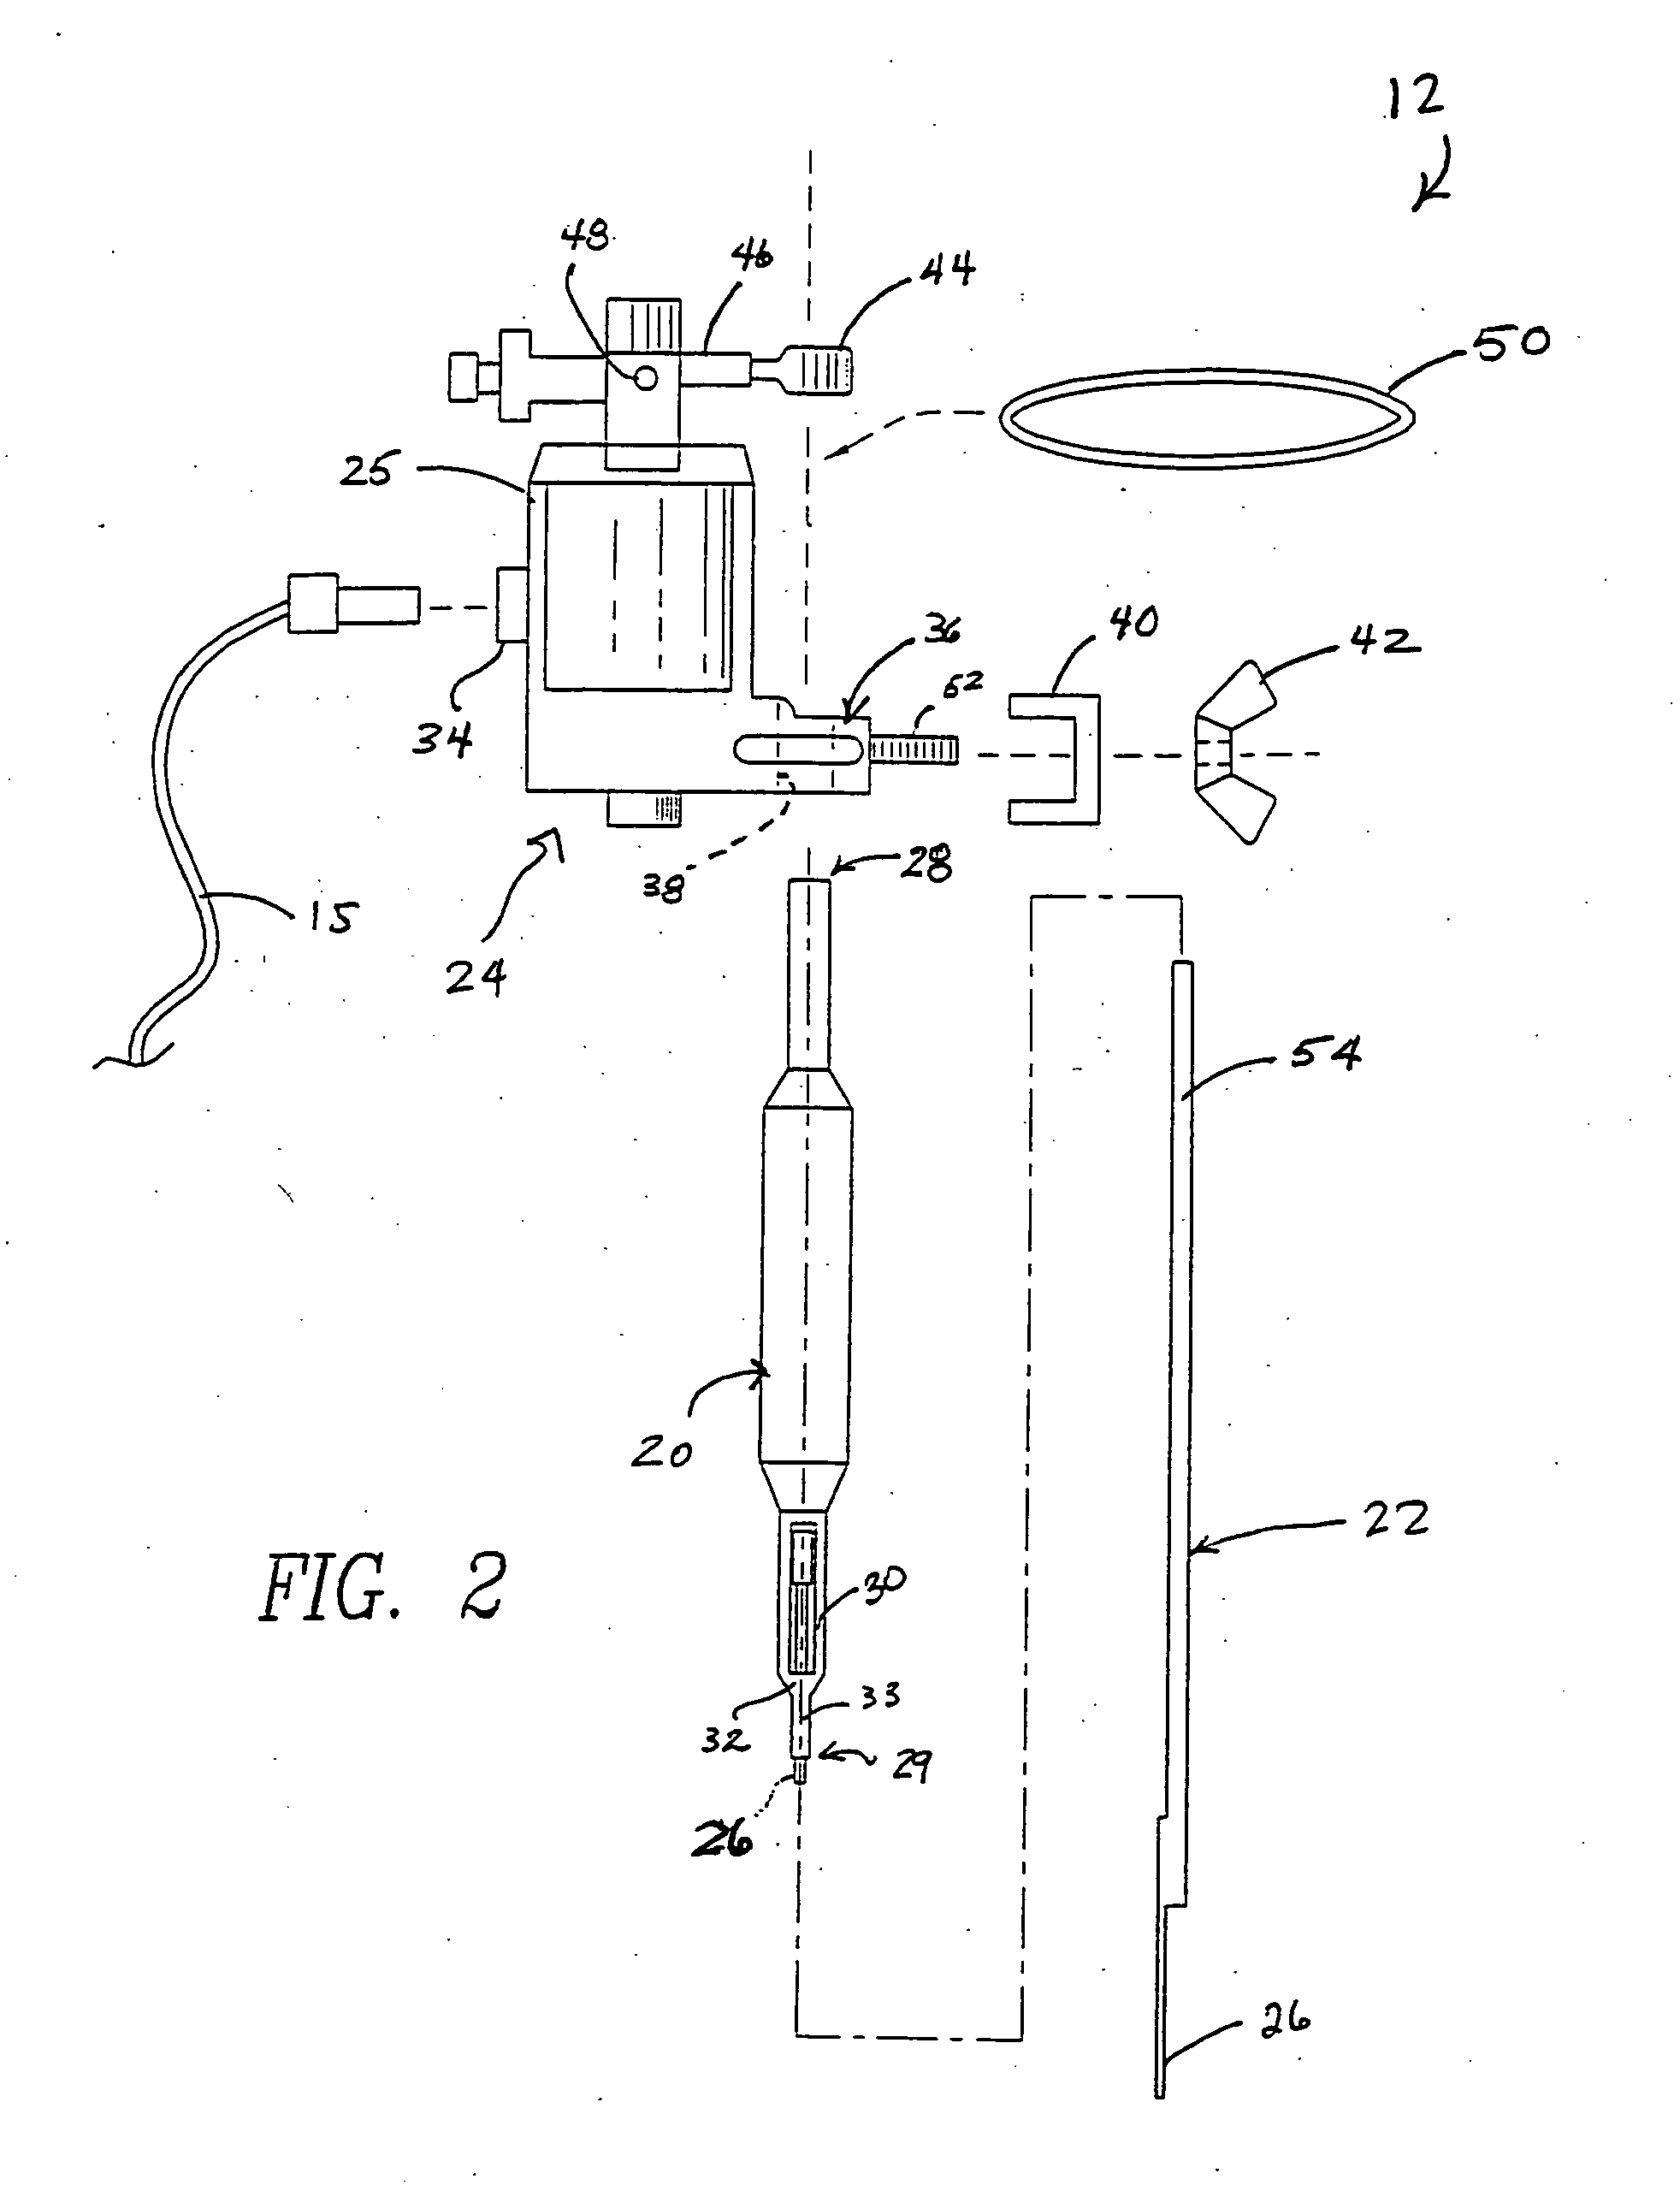 Method and apparatus for treating scar tissue